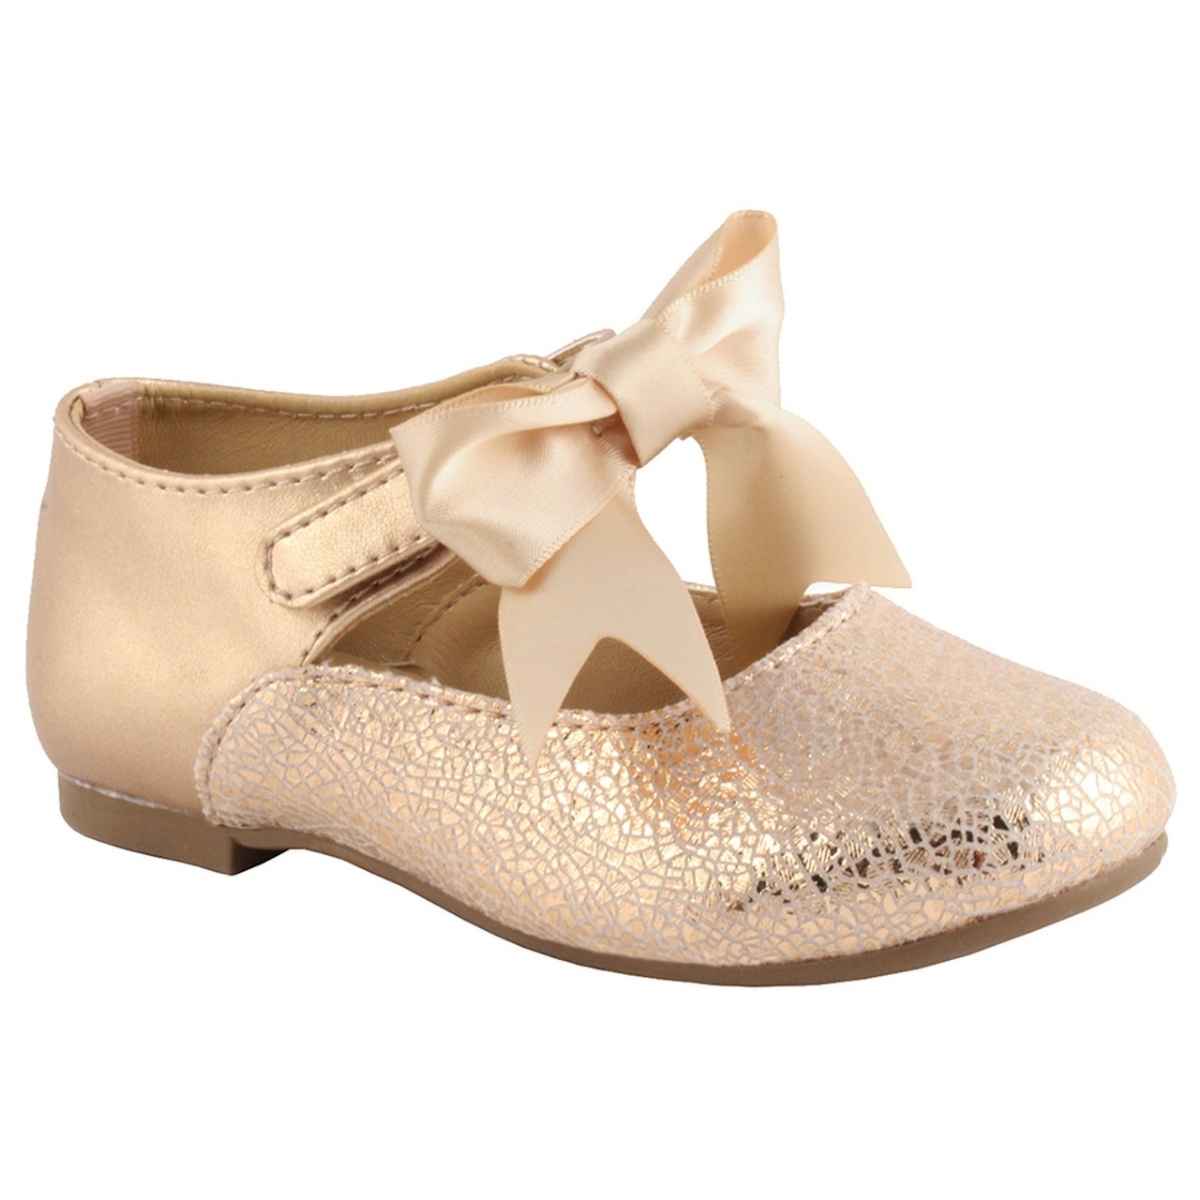 Chloe Toddler Rose Gold Dress Flats with Bow - Kids Shoe Box